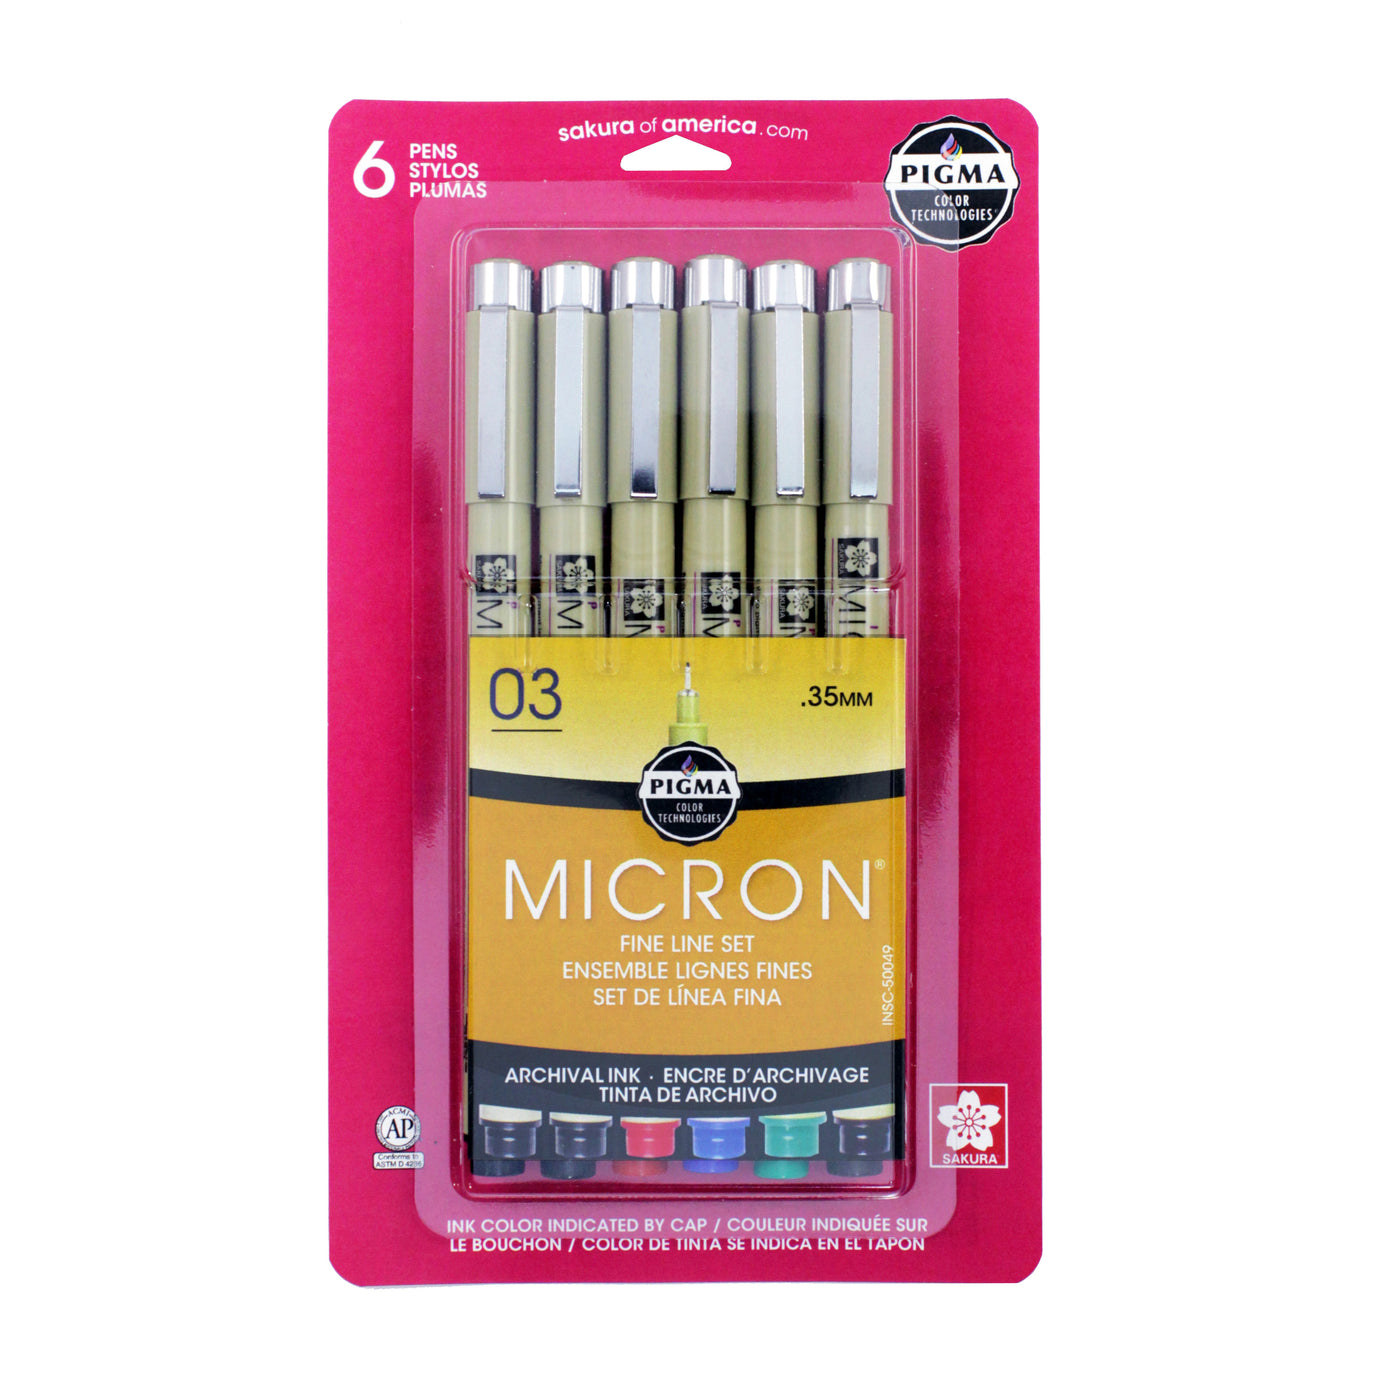 Pigma Micron (03) .35mm Pen - Assorted Colors - 6 Pack | Atlas Stationers.